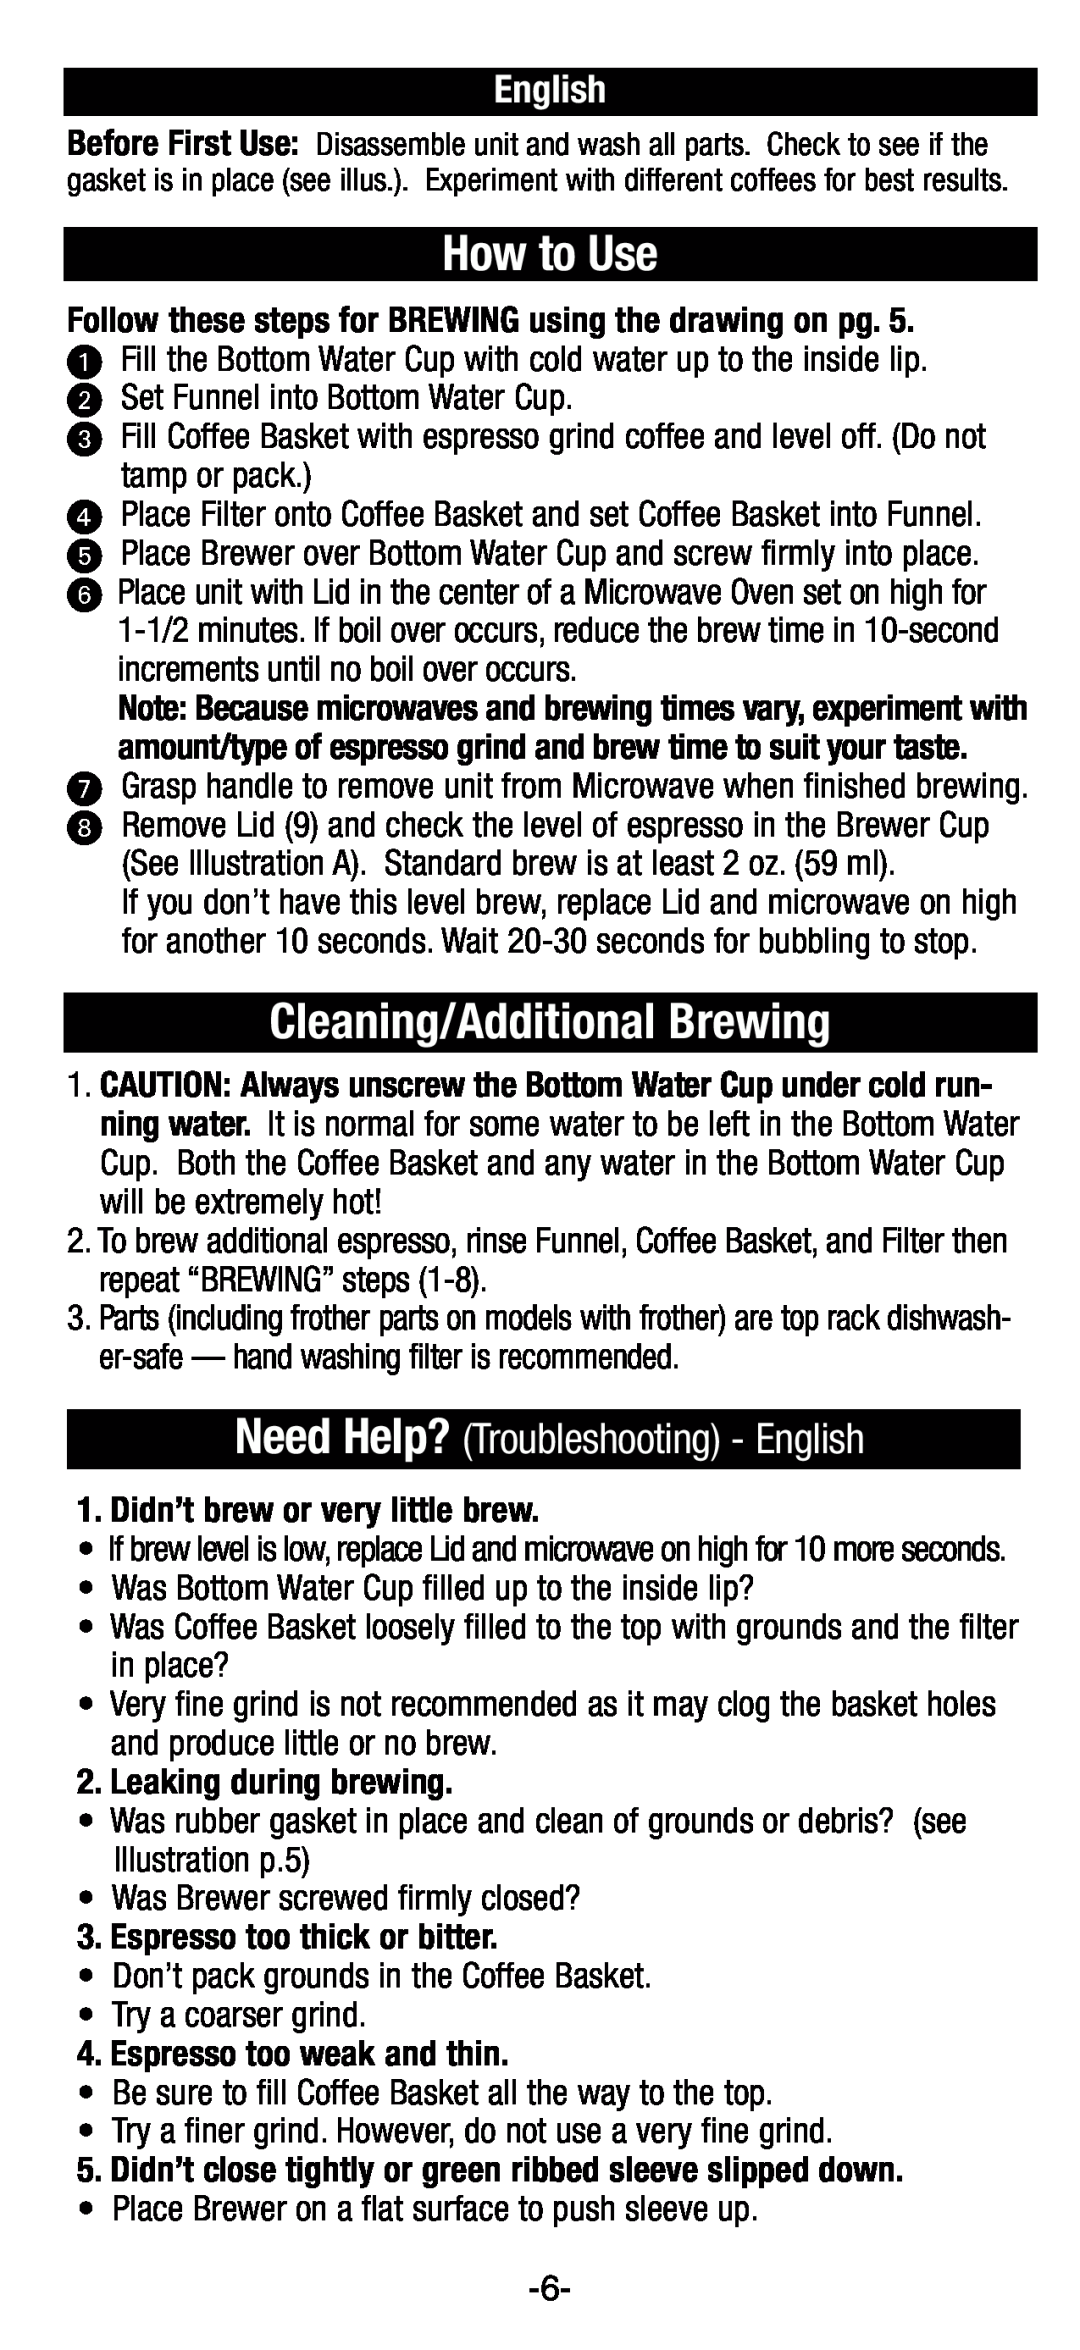 Black & Decker EE100 How to Use, Cleaning/Additional Brewing, Need Help? Troubleshooting - English, Leaking during brewing 